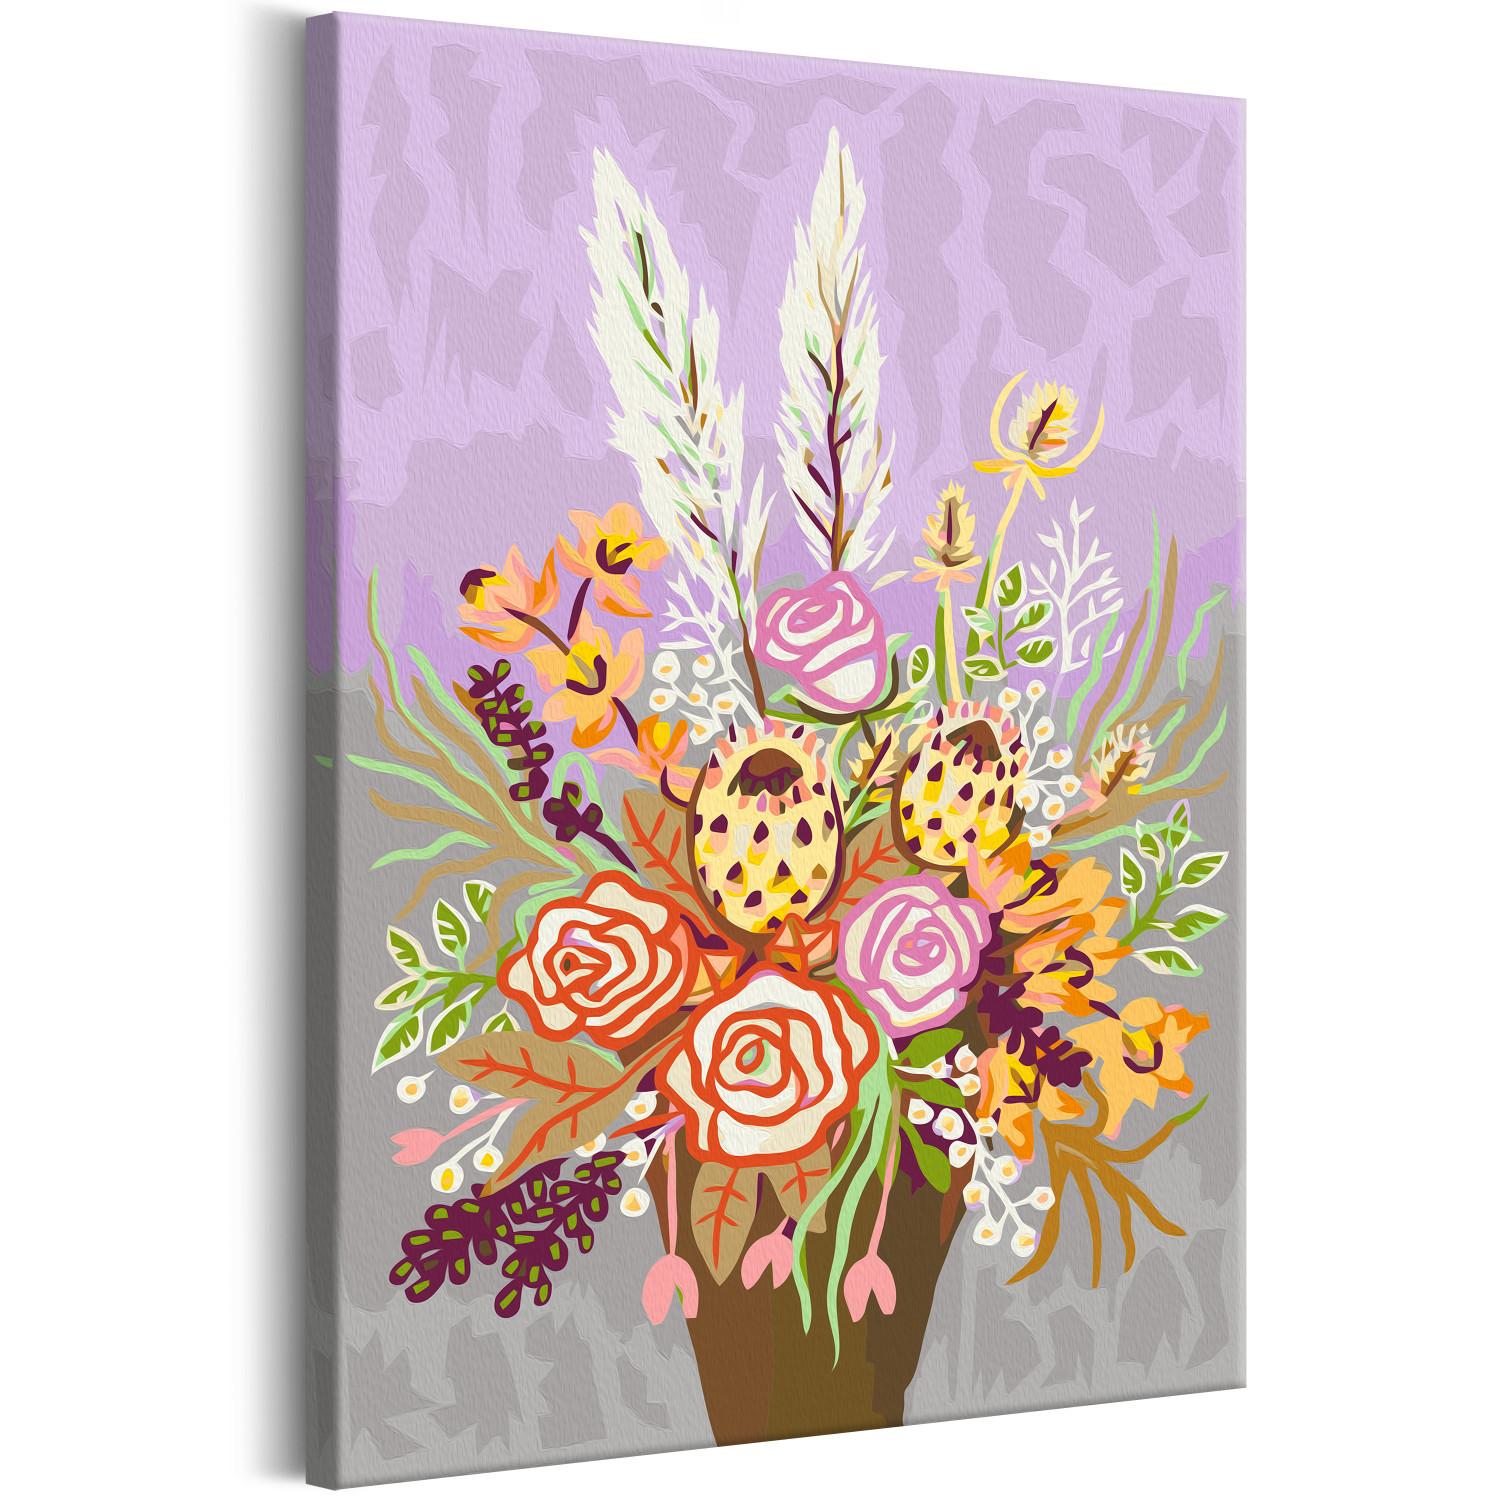 Paint by Number Kit Boho Bouquet